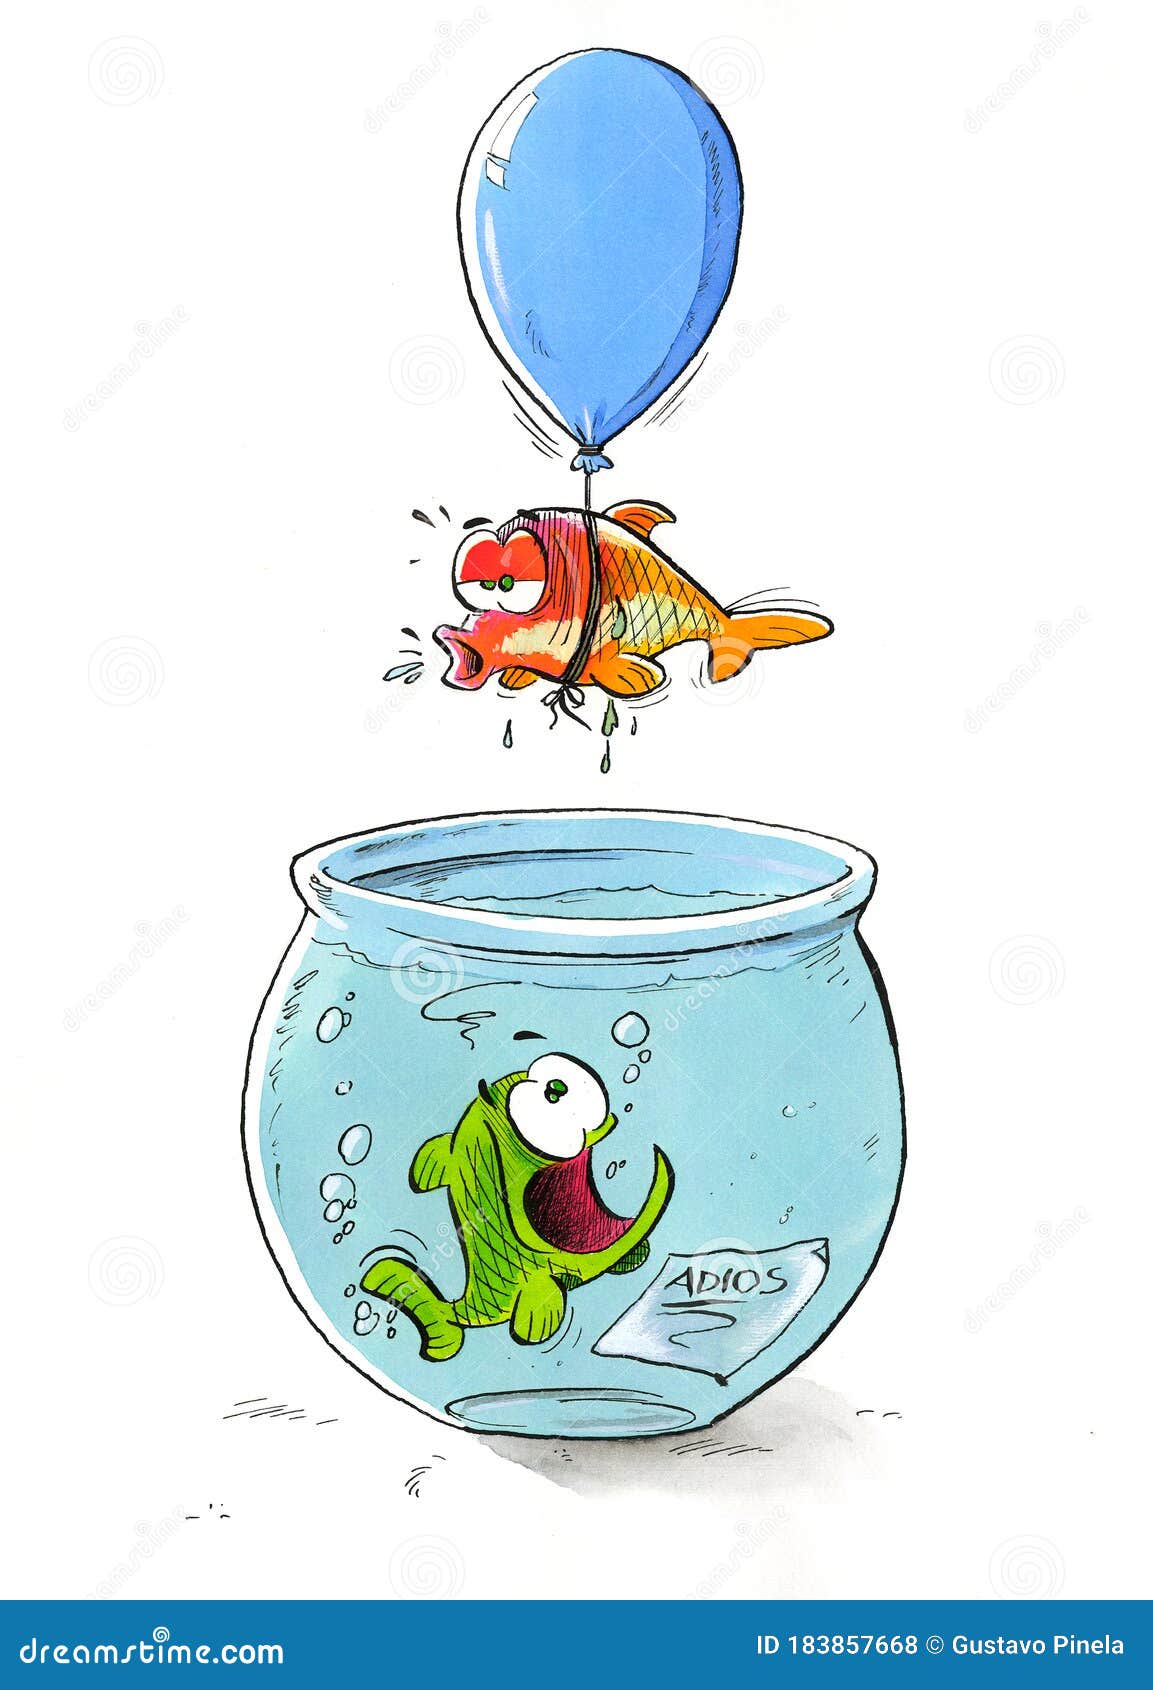 a fish leaves the fish tank in a balloon, leaving a farewell note to another fish in the fish tank